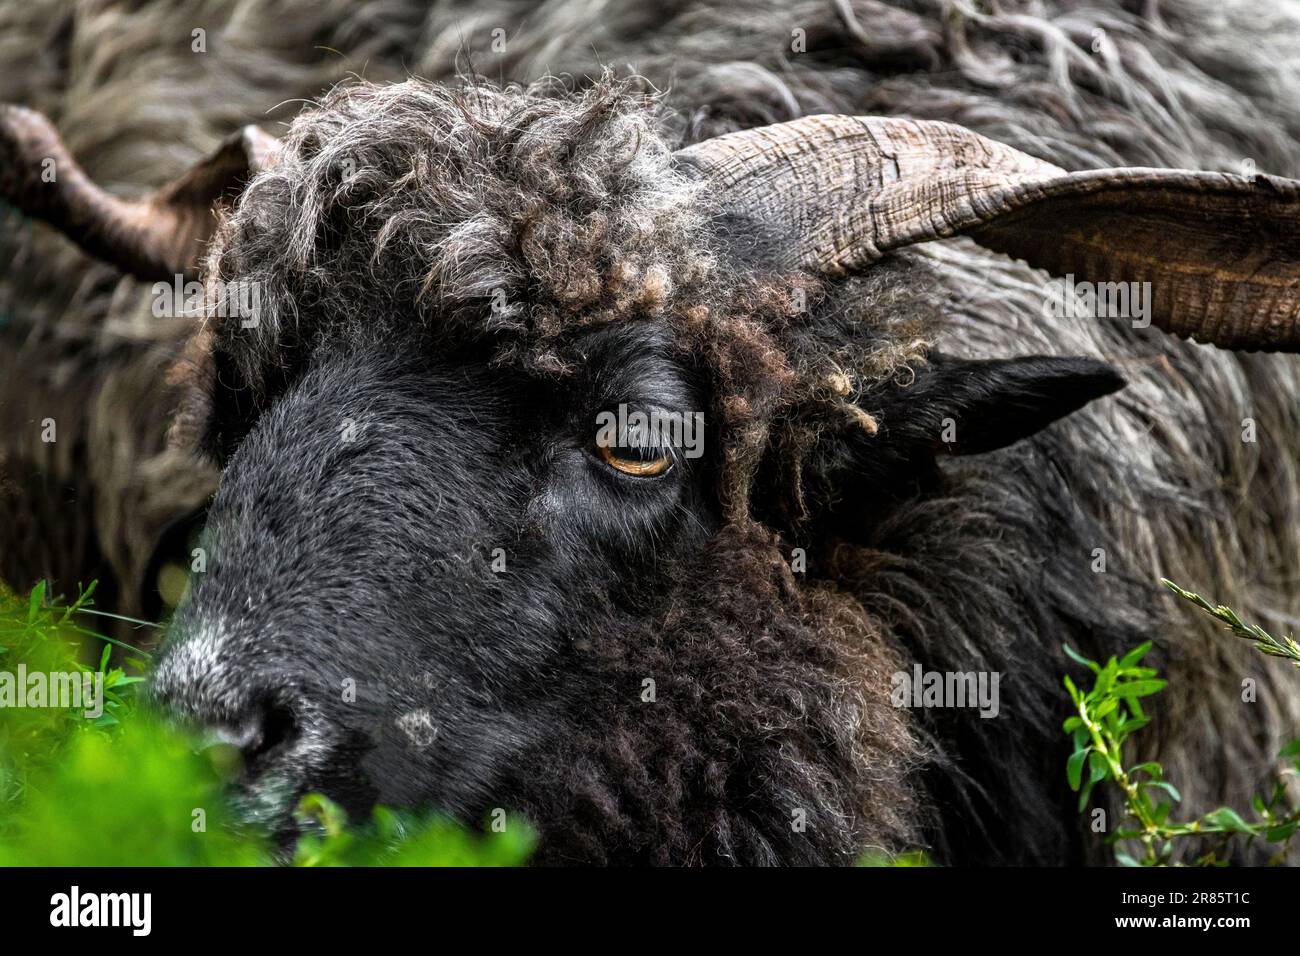 Portrait of a male black Hortobagy Racka sheep (Ovis aries strepsiceros Hungaricus) with long spiral shaped horns and expressive eyes, having a rest. Stock Photo